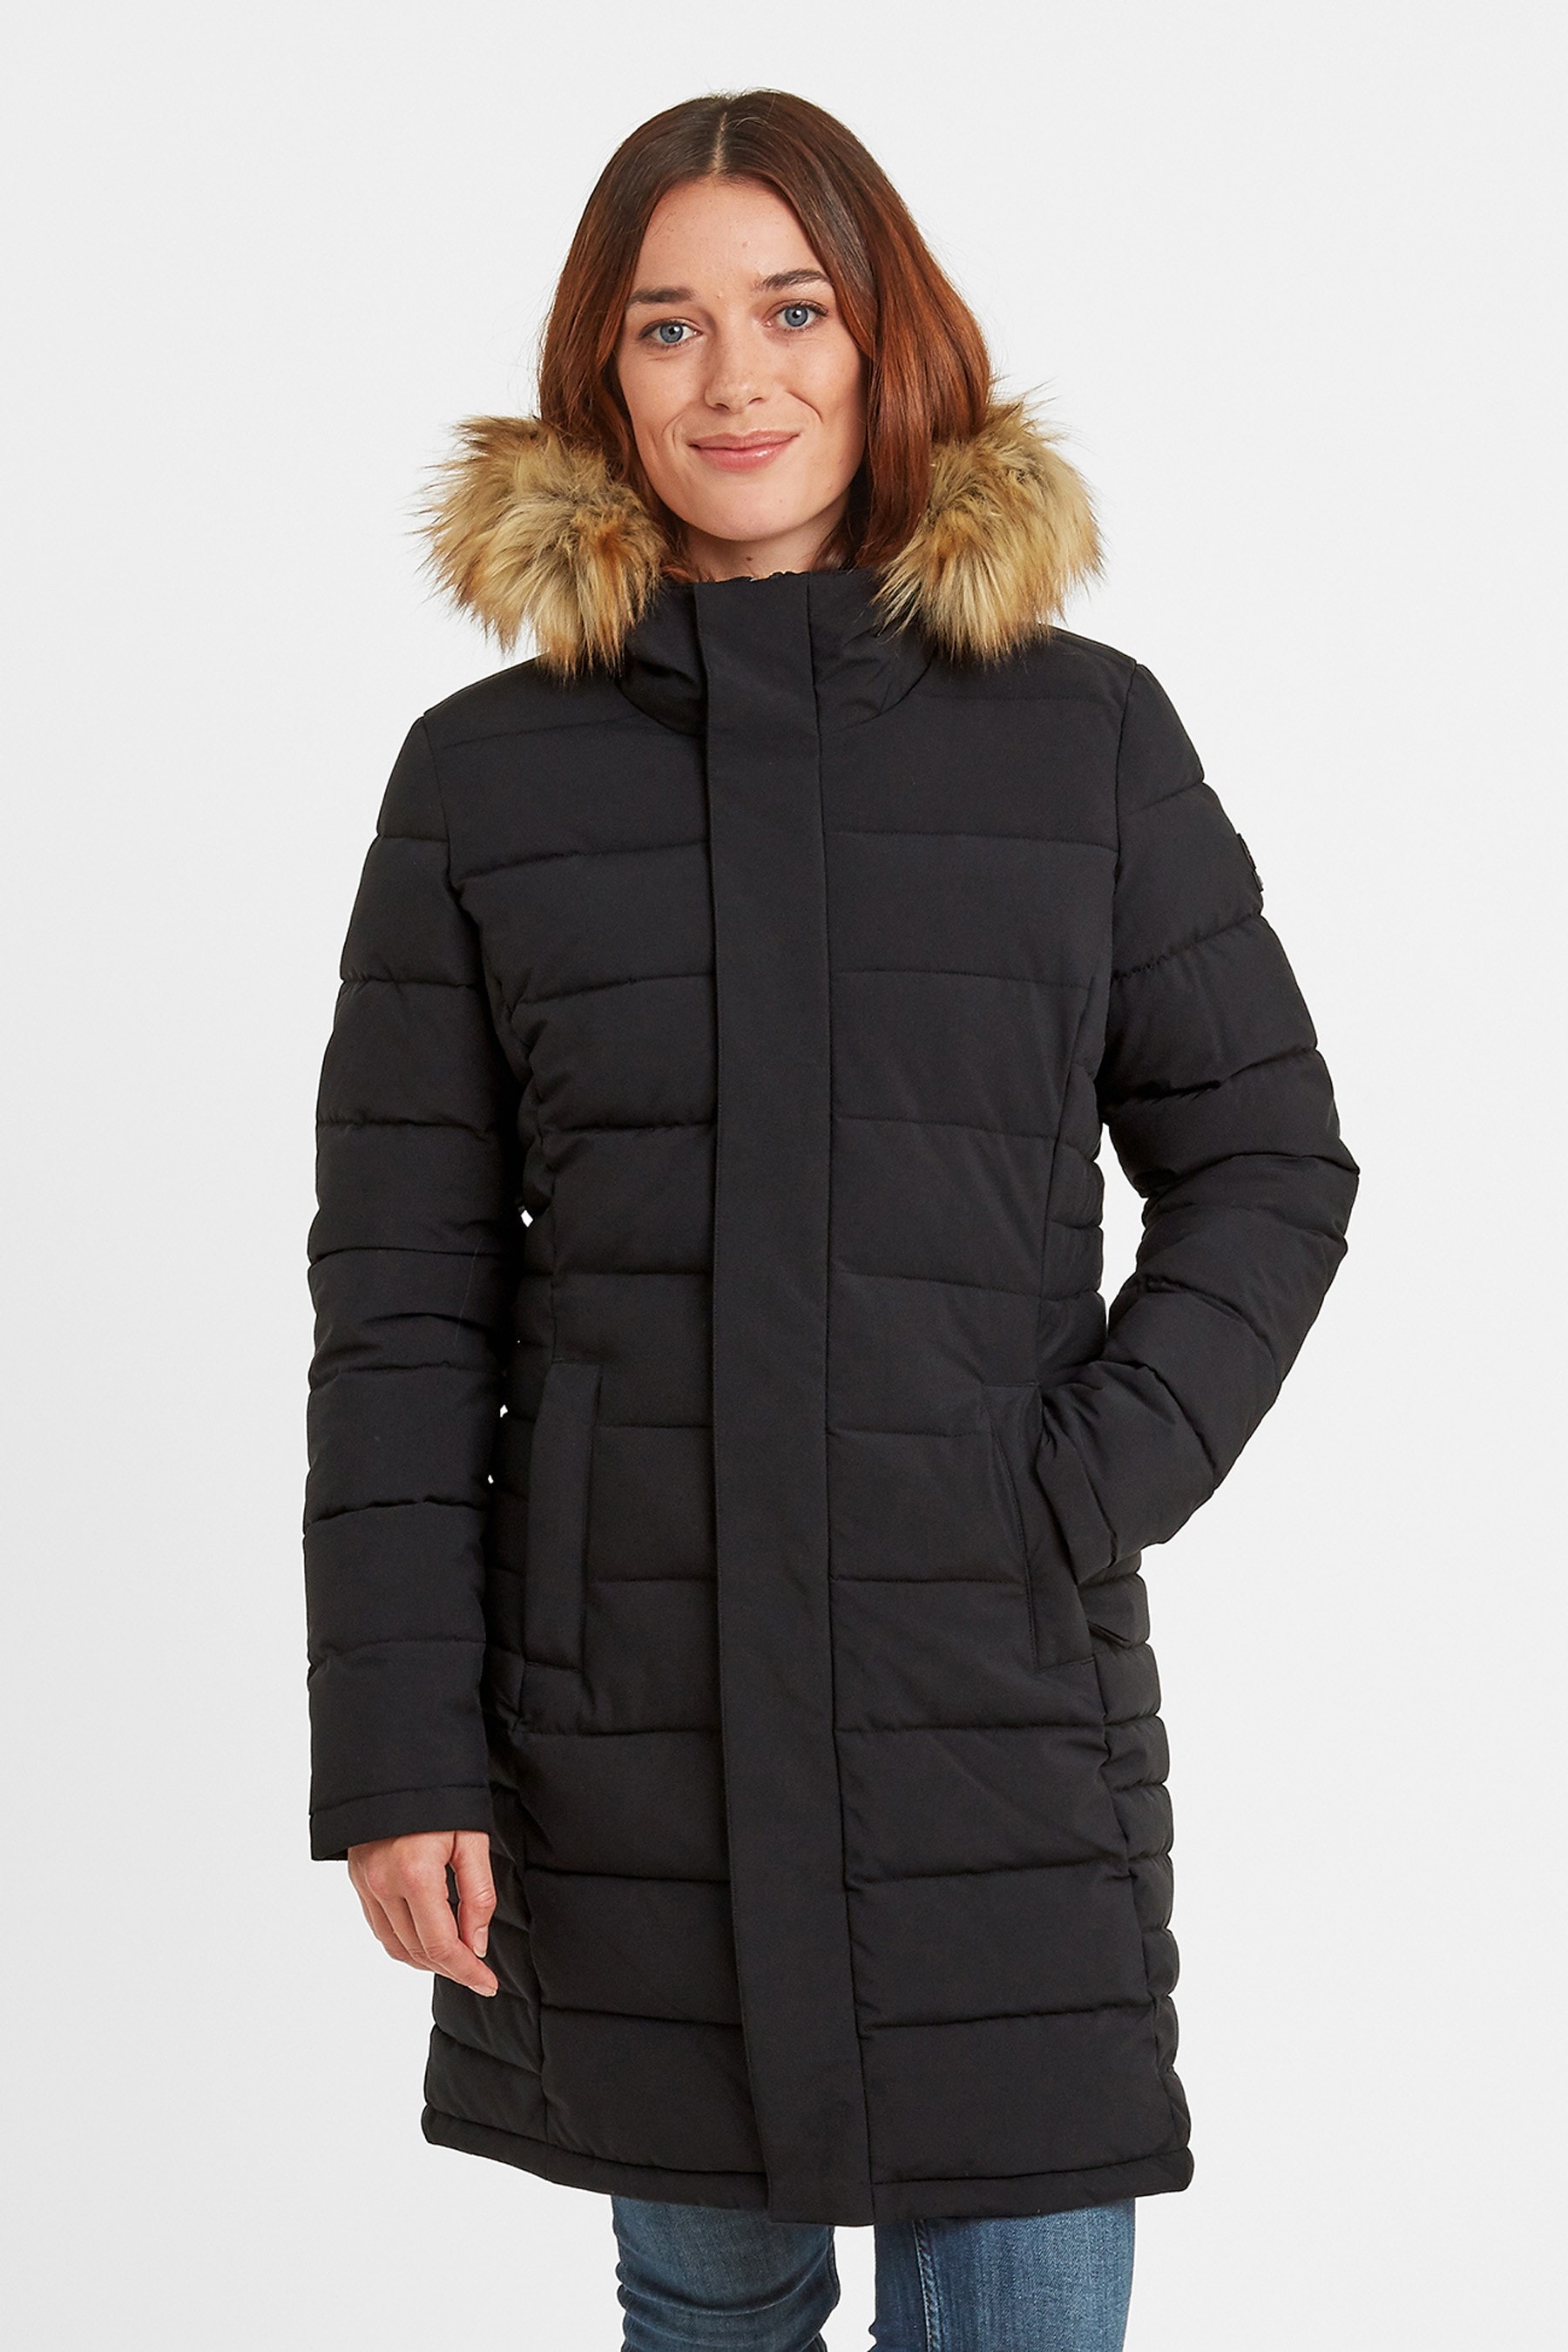 Buy Tog 24 Firbeck Womens Black Long Insulated Jacket from Next Ireland